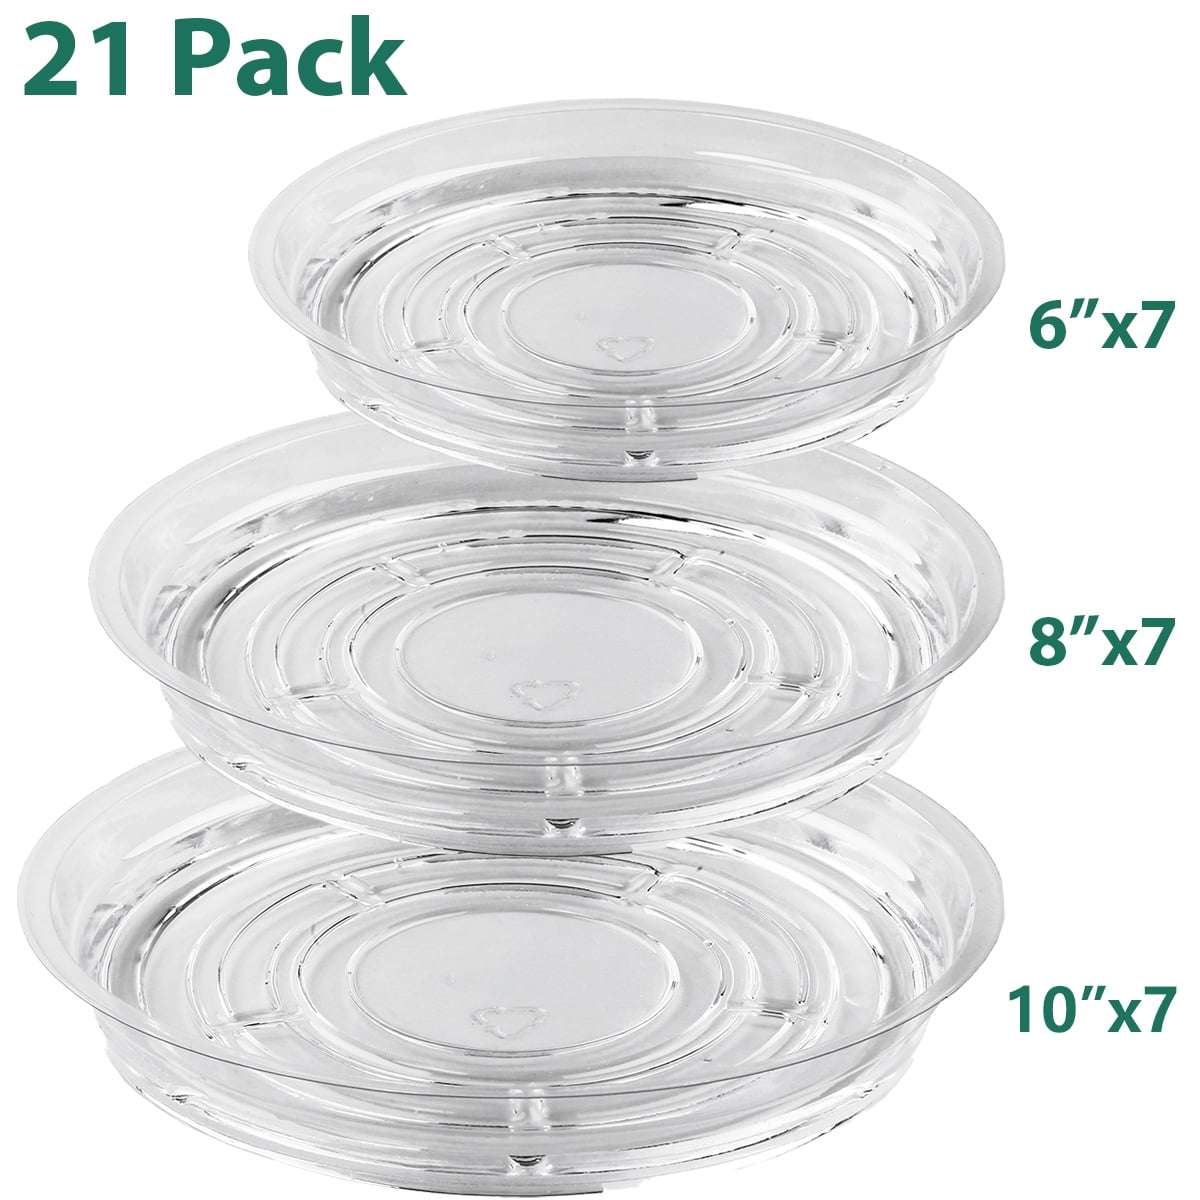 Details about   12 PLASTIC ROUND PLANT FLOWER POT BASE SAUCER PLATE WATER DRIP TRAY PLANTER TRAY 